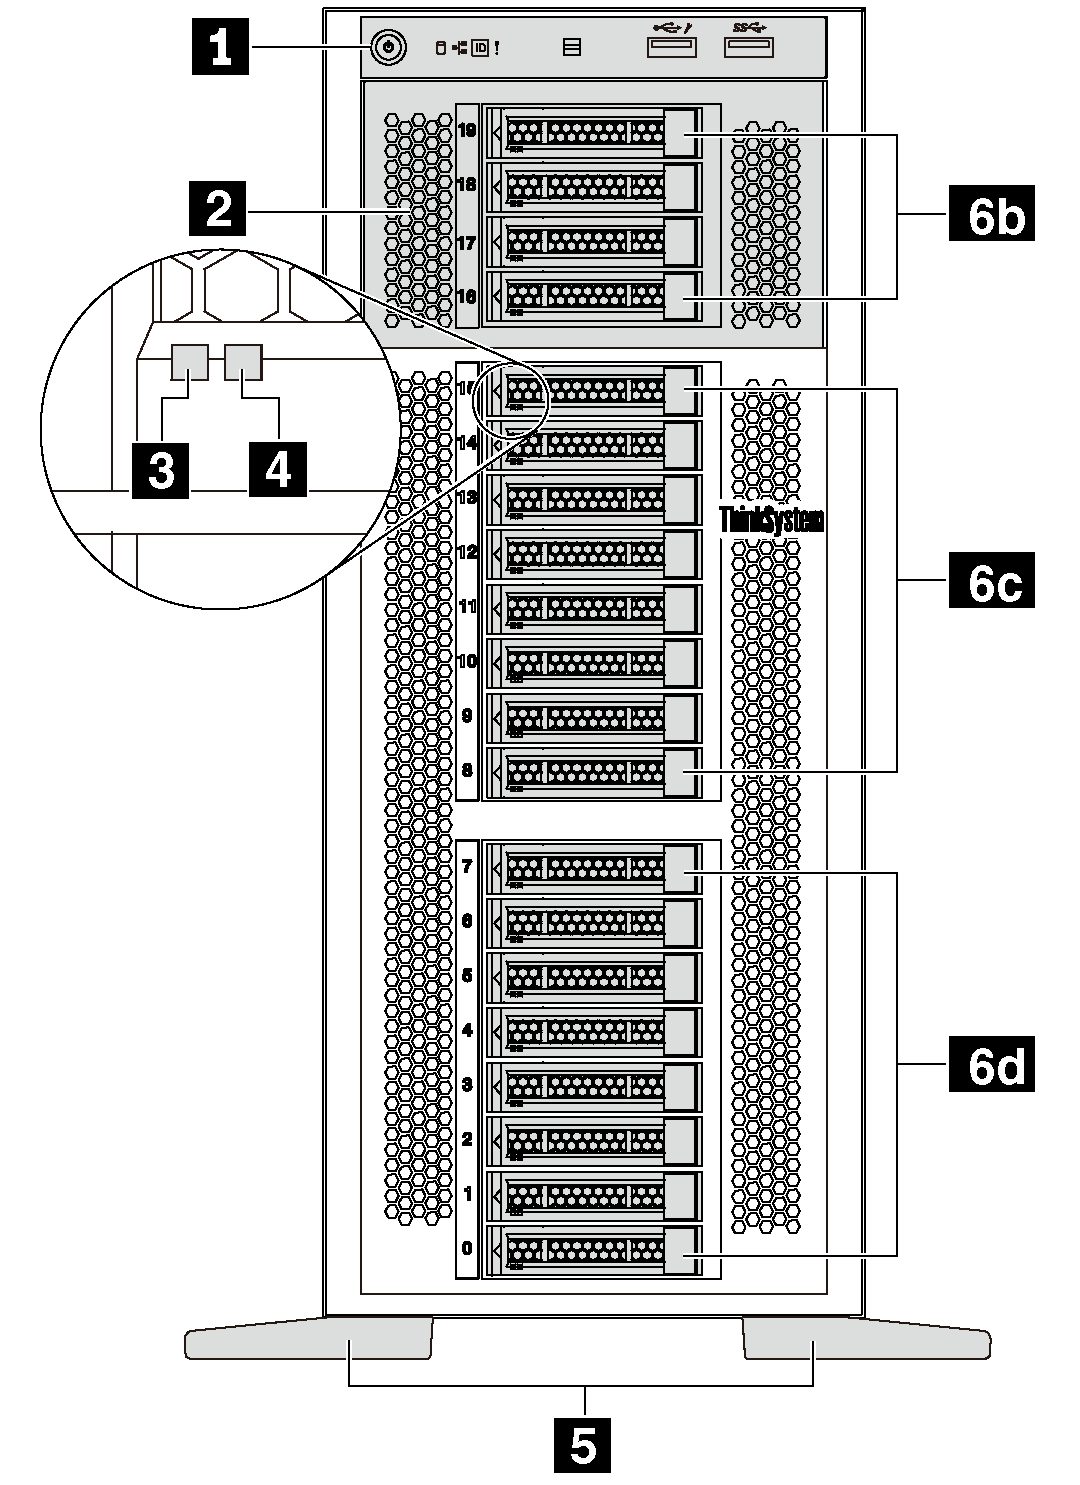 Front view of server models with twenty 2.5-inch-drive bays